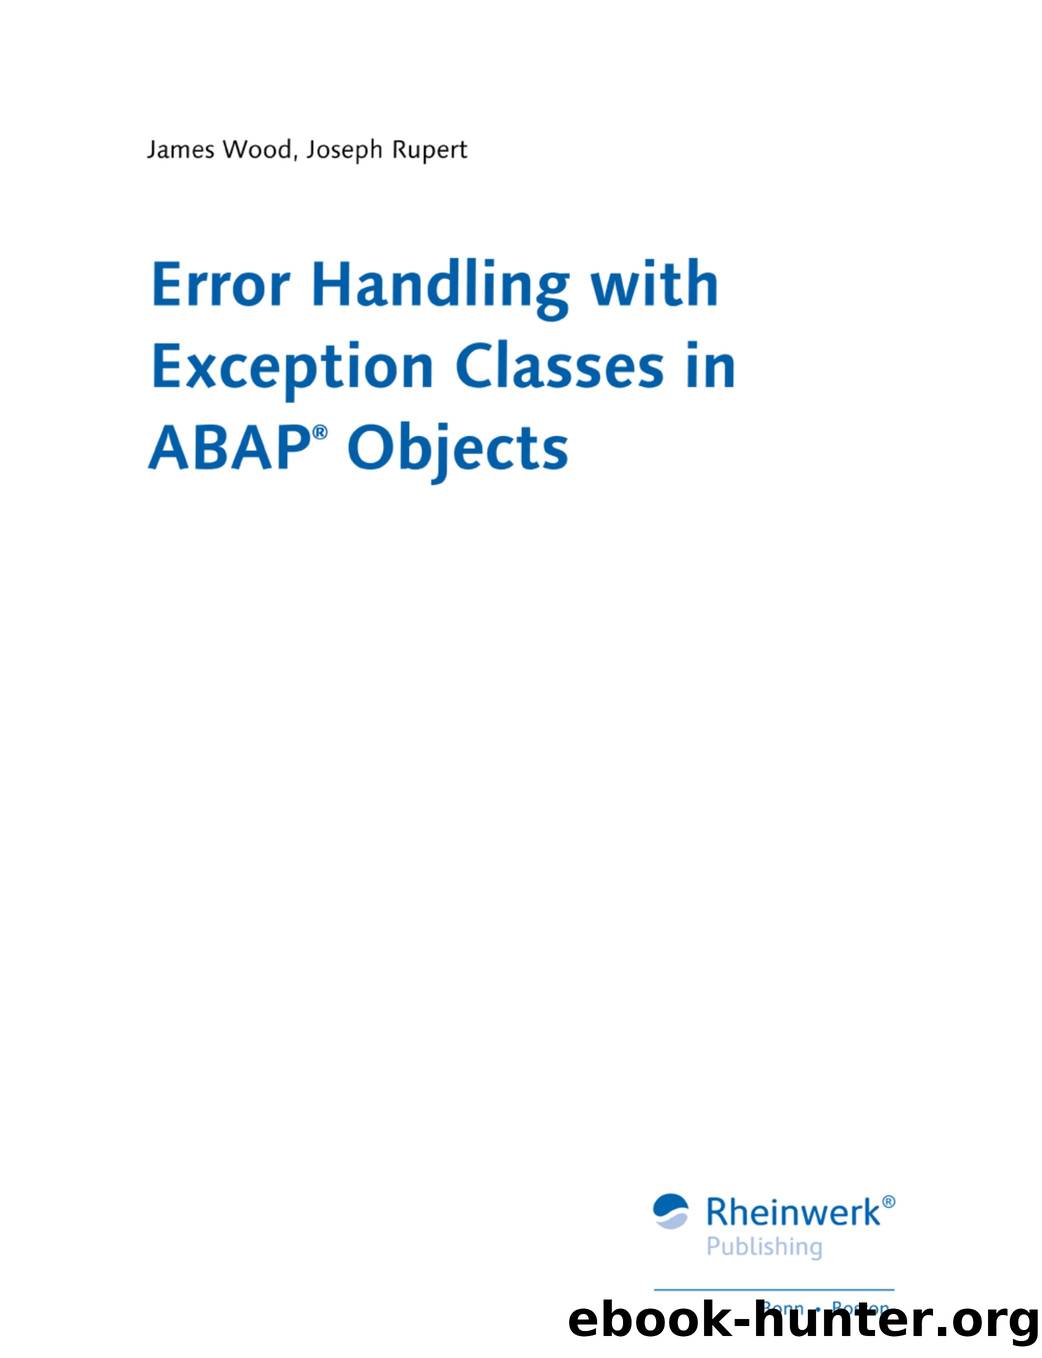 Error Handling with Exception Classes in ABAP Objects by Unknown